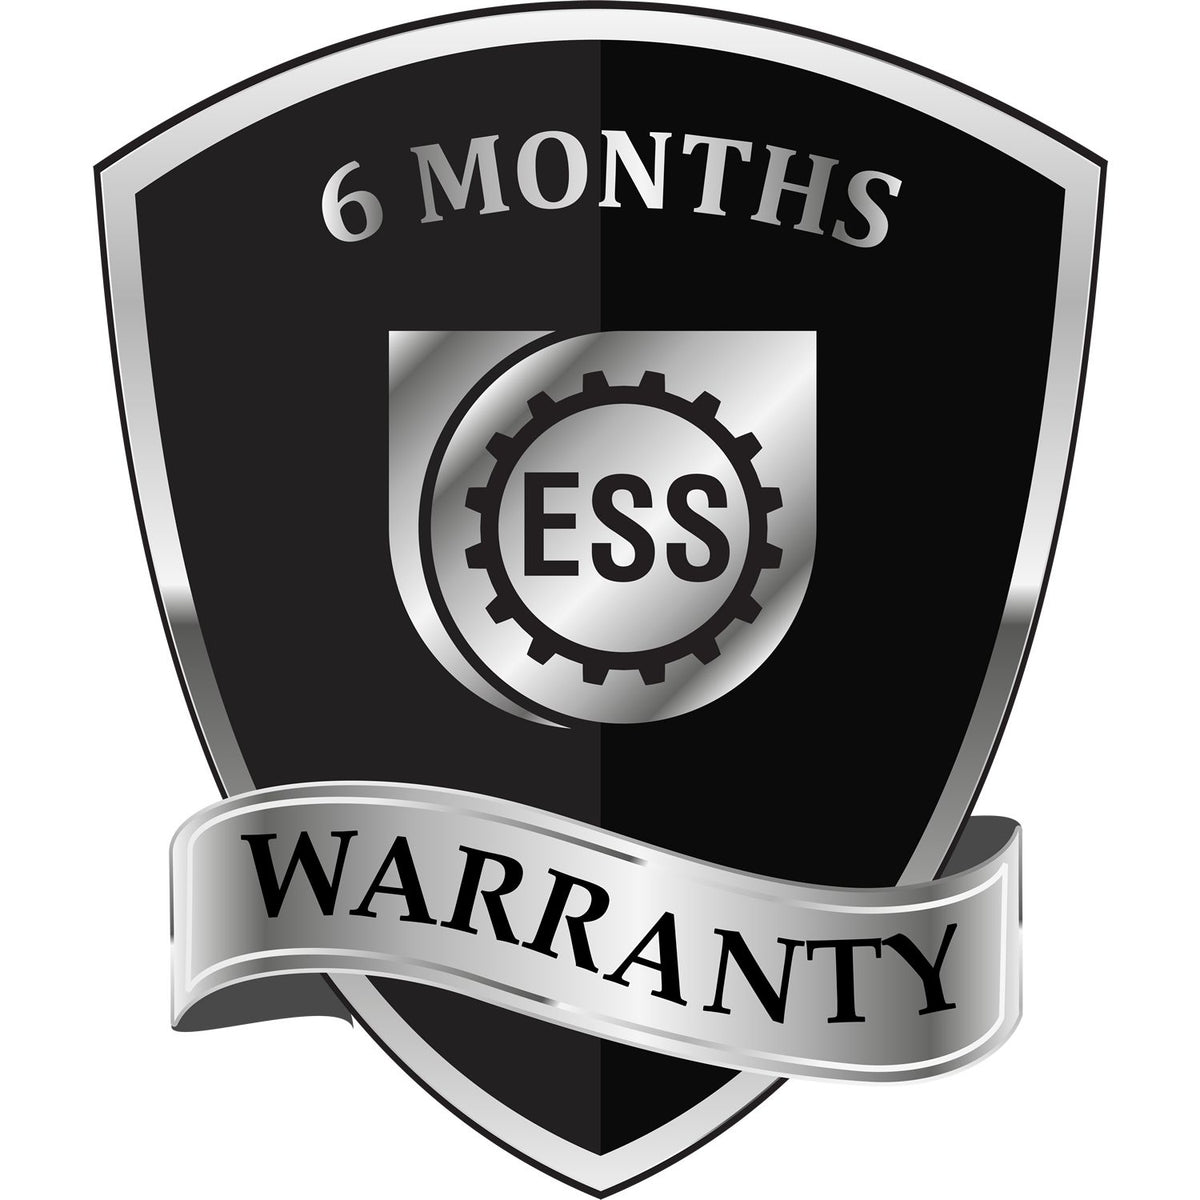 A badge or emblem showing a warranty icon for the Self-Inking Arkansas PE Stamp